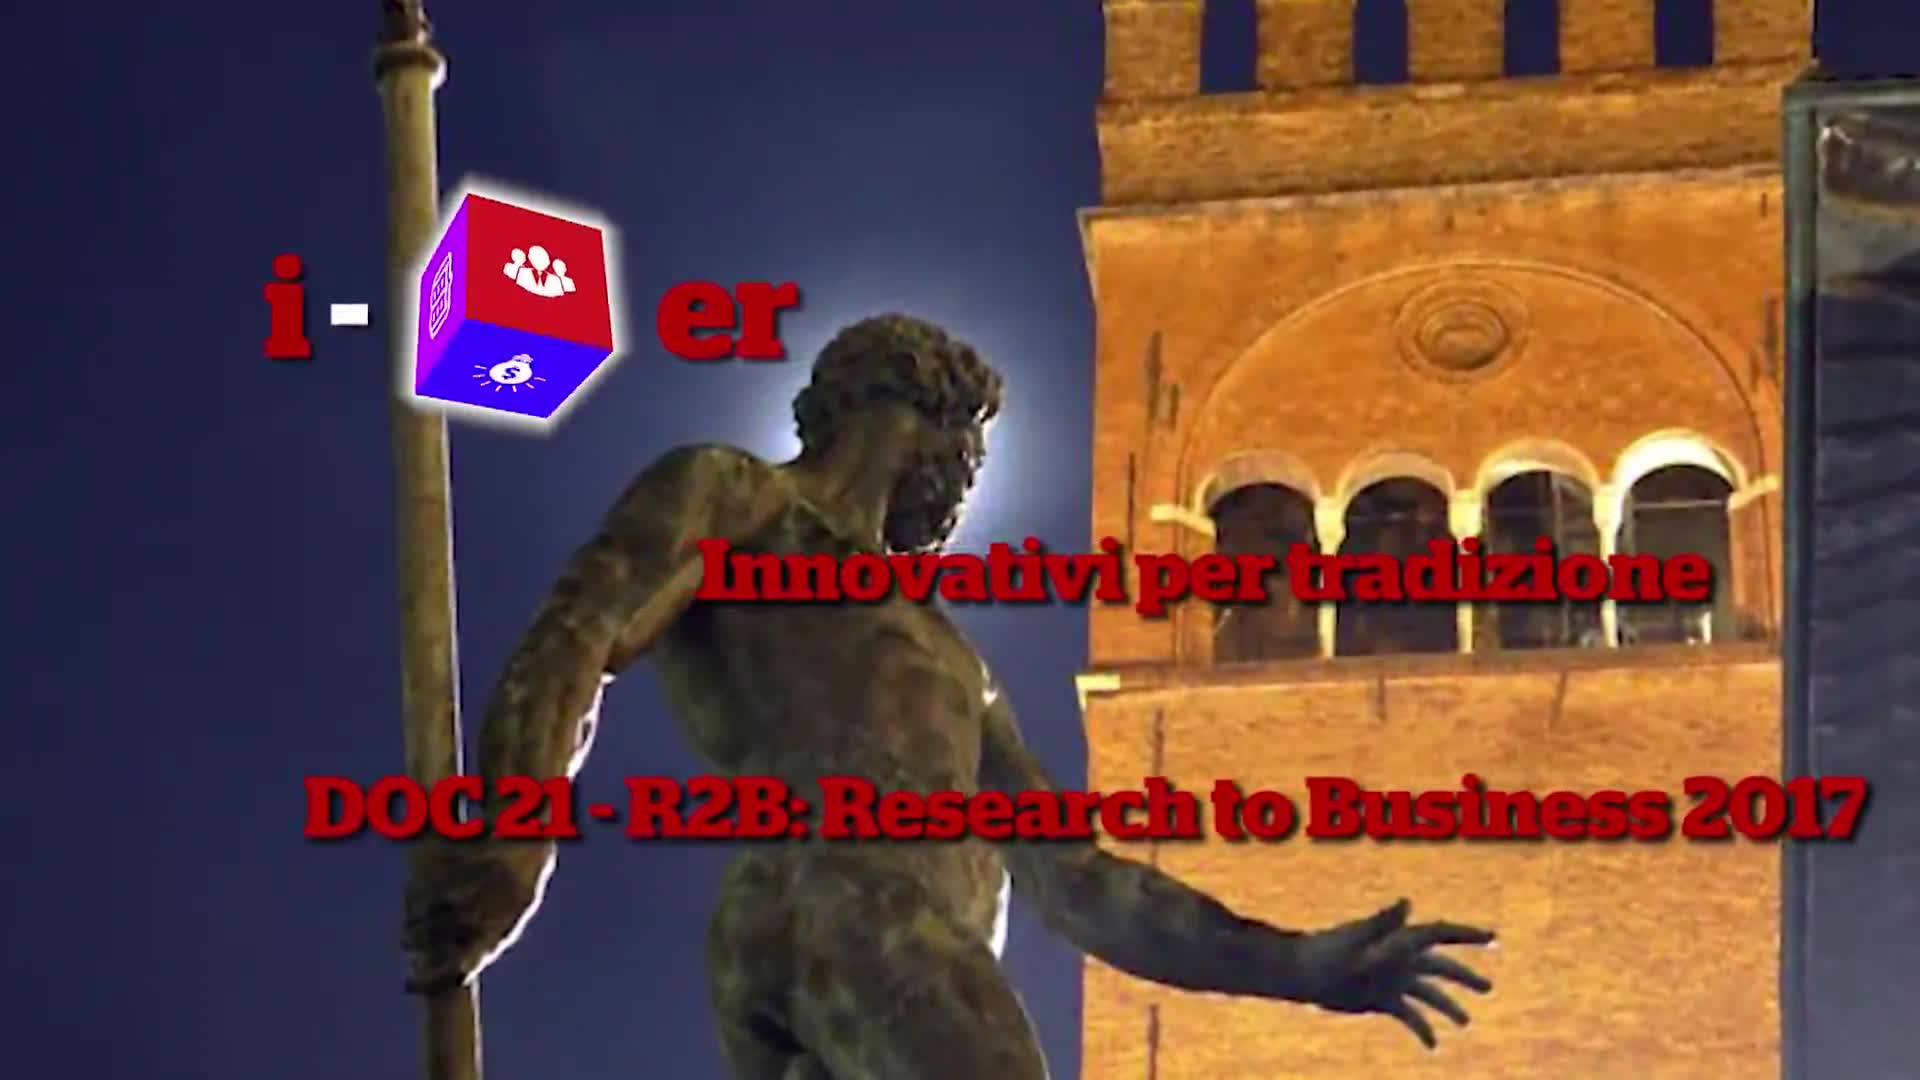 iCUBer DOC - Puntata 21 - R2B - Research to Business 2017 - immagine